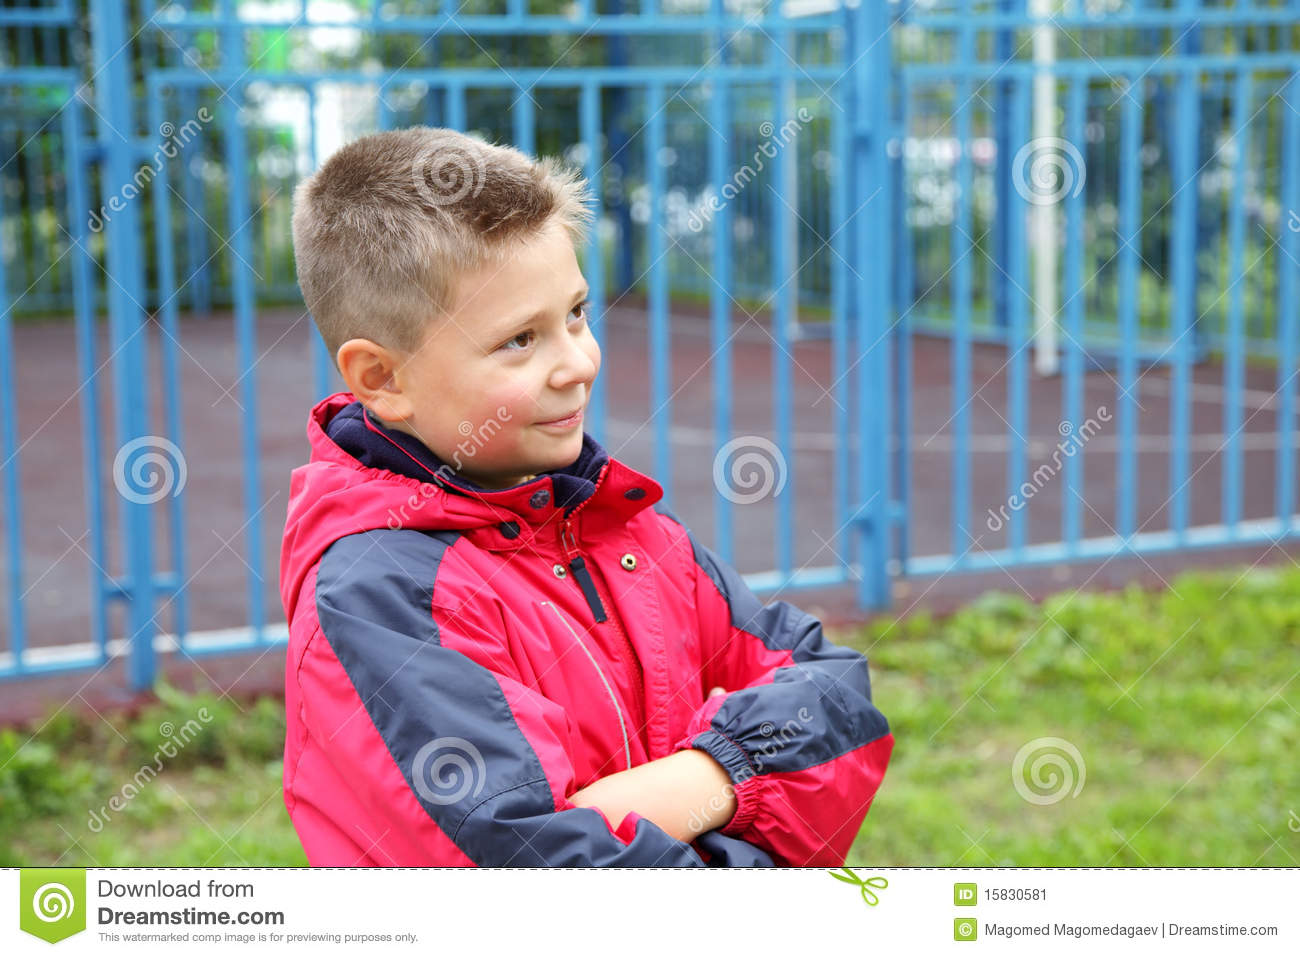 Boy Outdoors Arms Folded Stock Image   Image  15830581